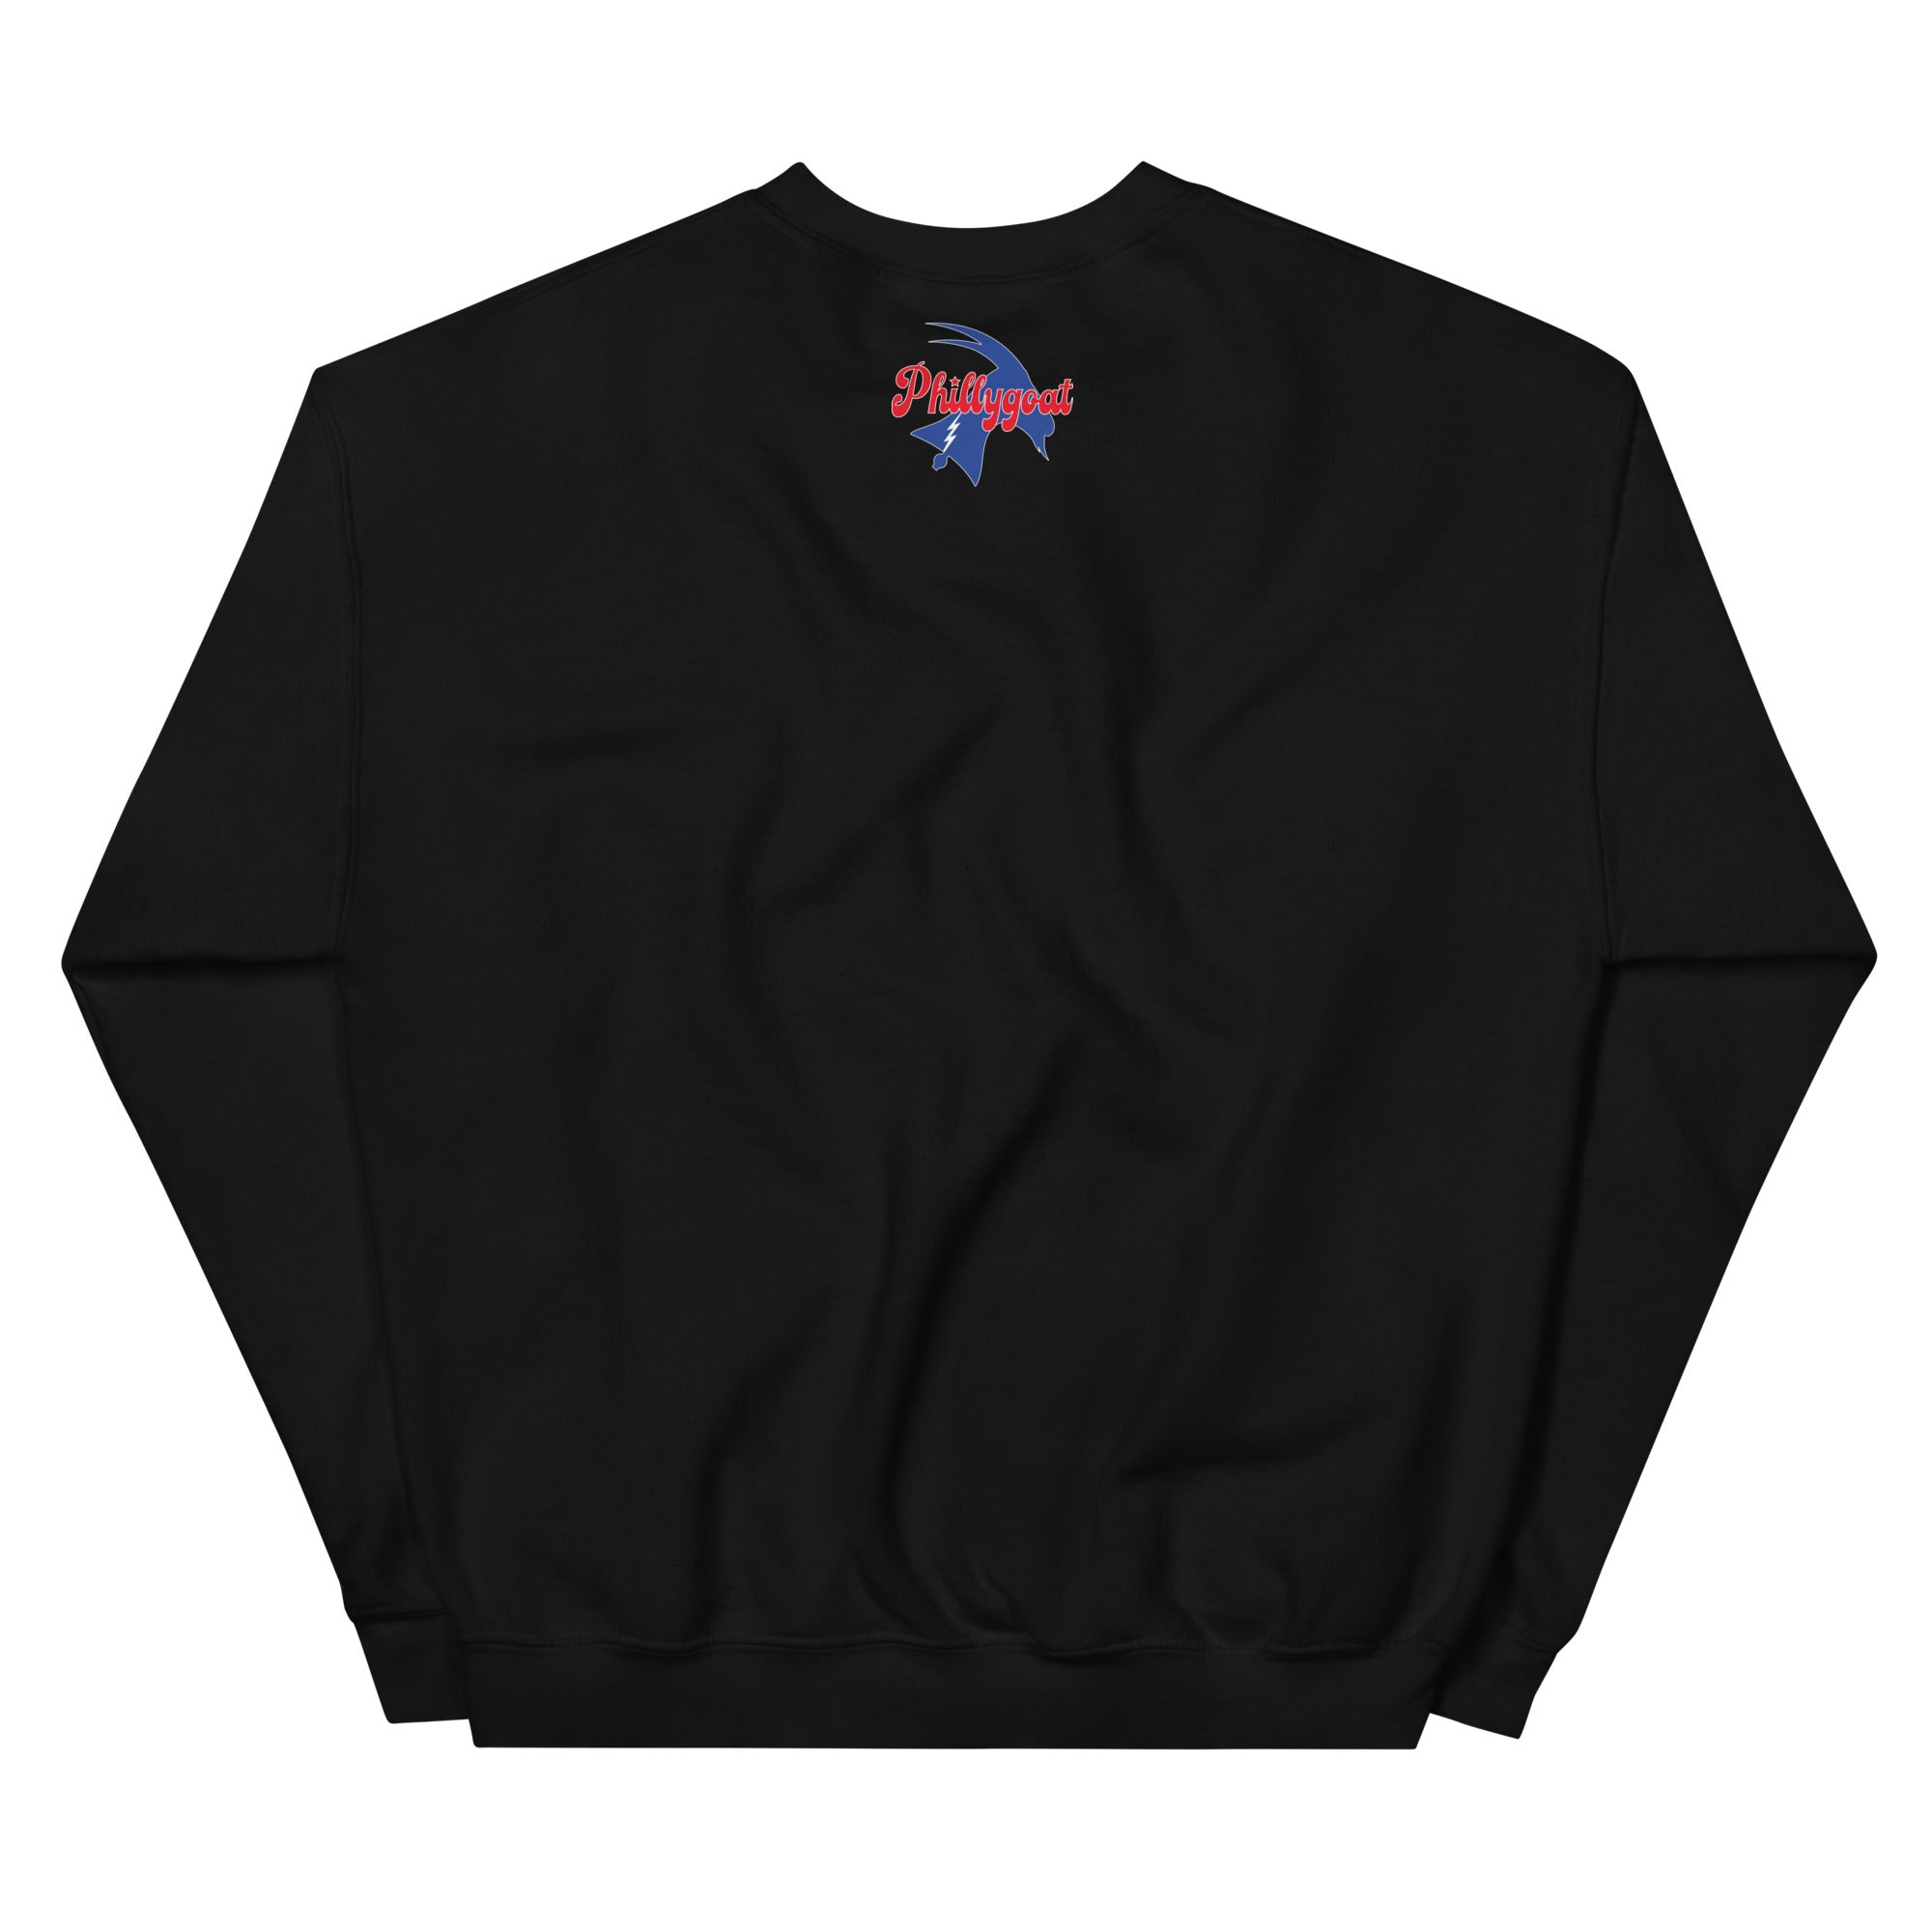 "The Bryce Is Right" Sweatshirt